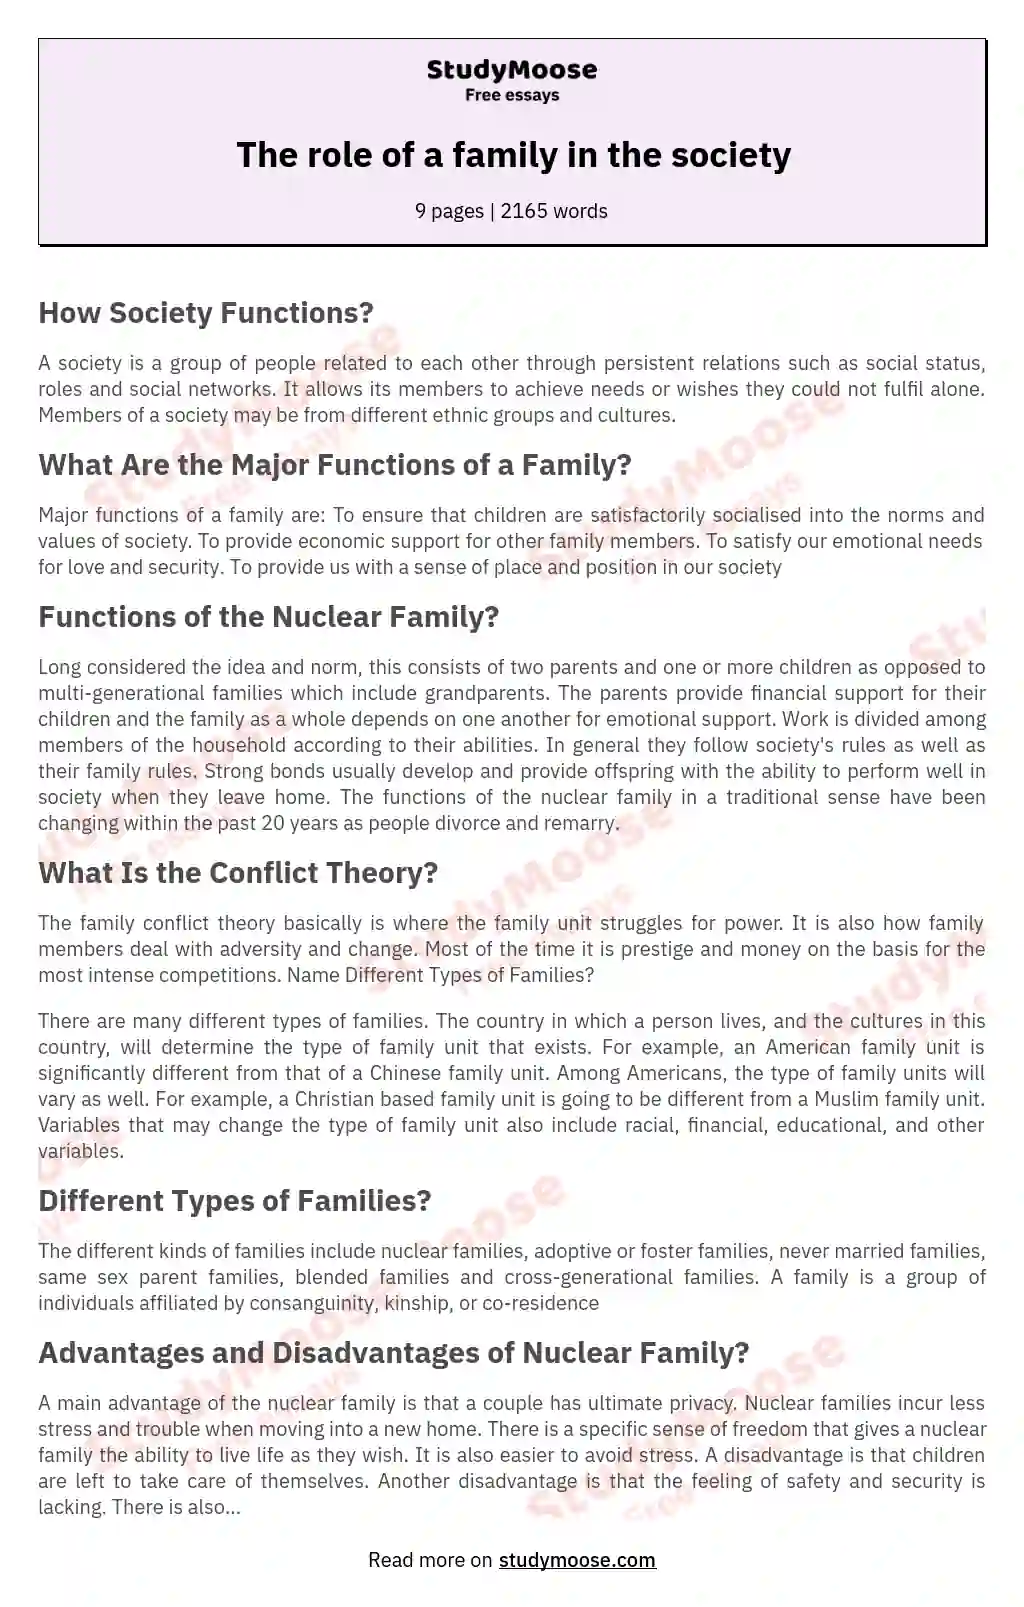 The role of a family in the society essay